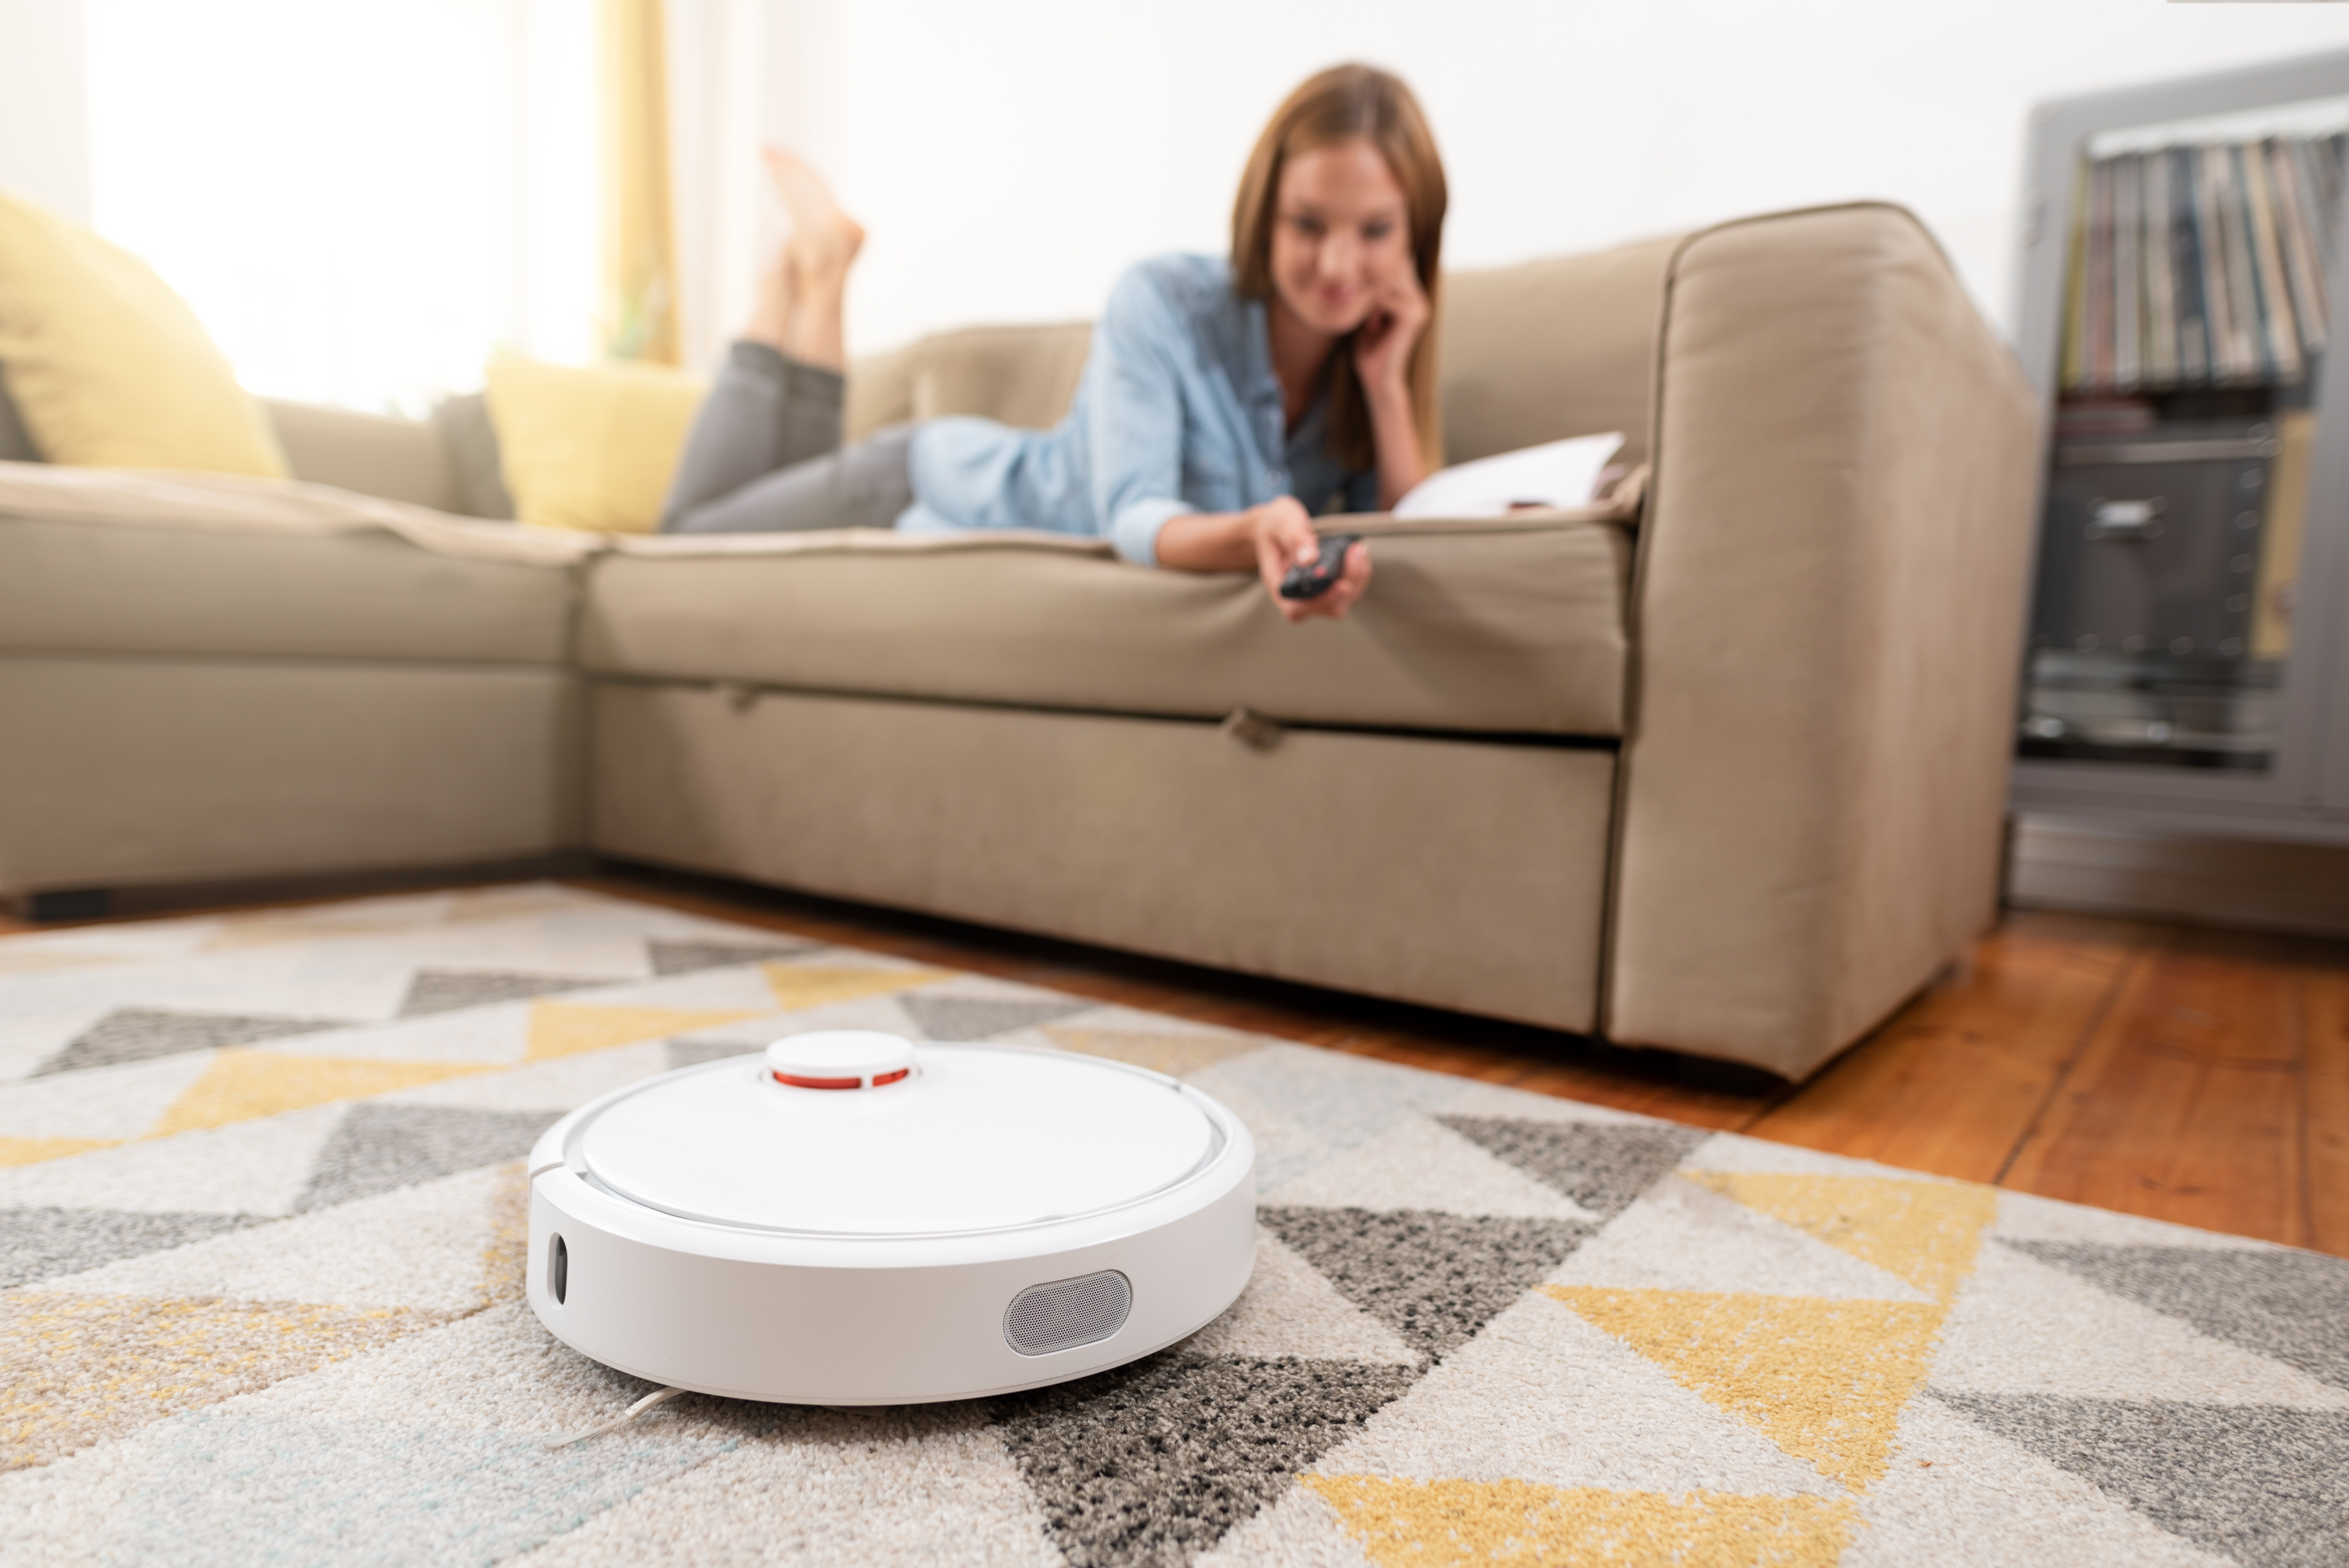 The Best Robot Vacuums In 2021 Roomba, What Is The Best Roomba For Hardwood Floors